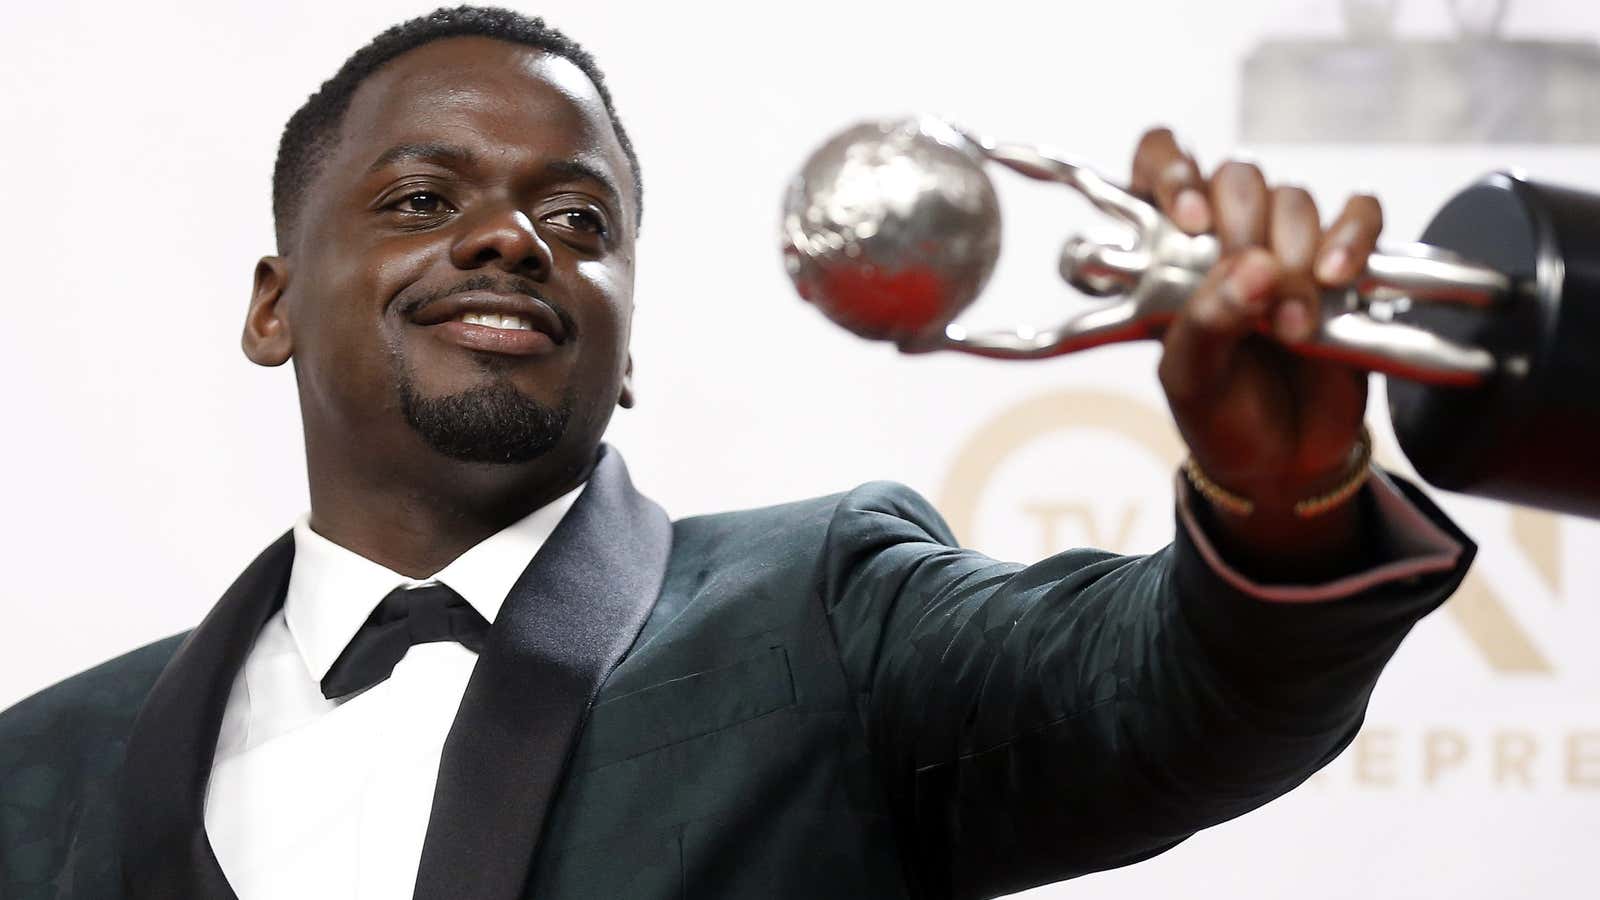 Daniel Kaluuya with his NAACP Image award for Outstanding Actor in a Motion Picture for “Get Out”.